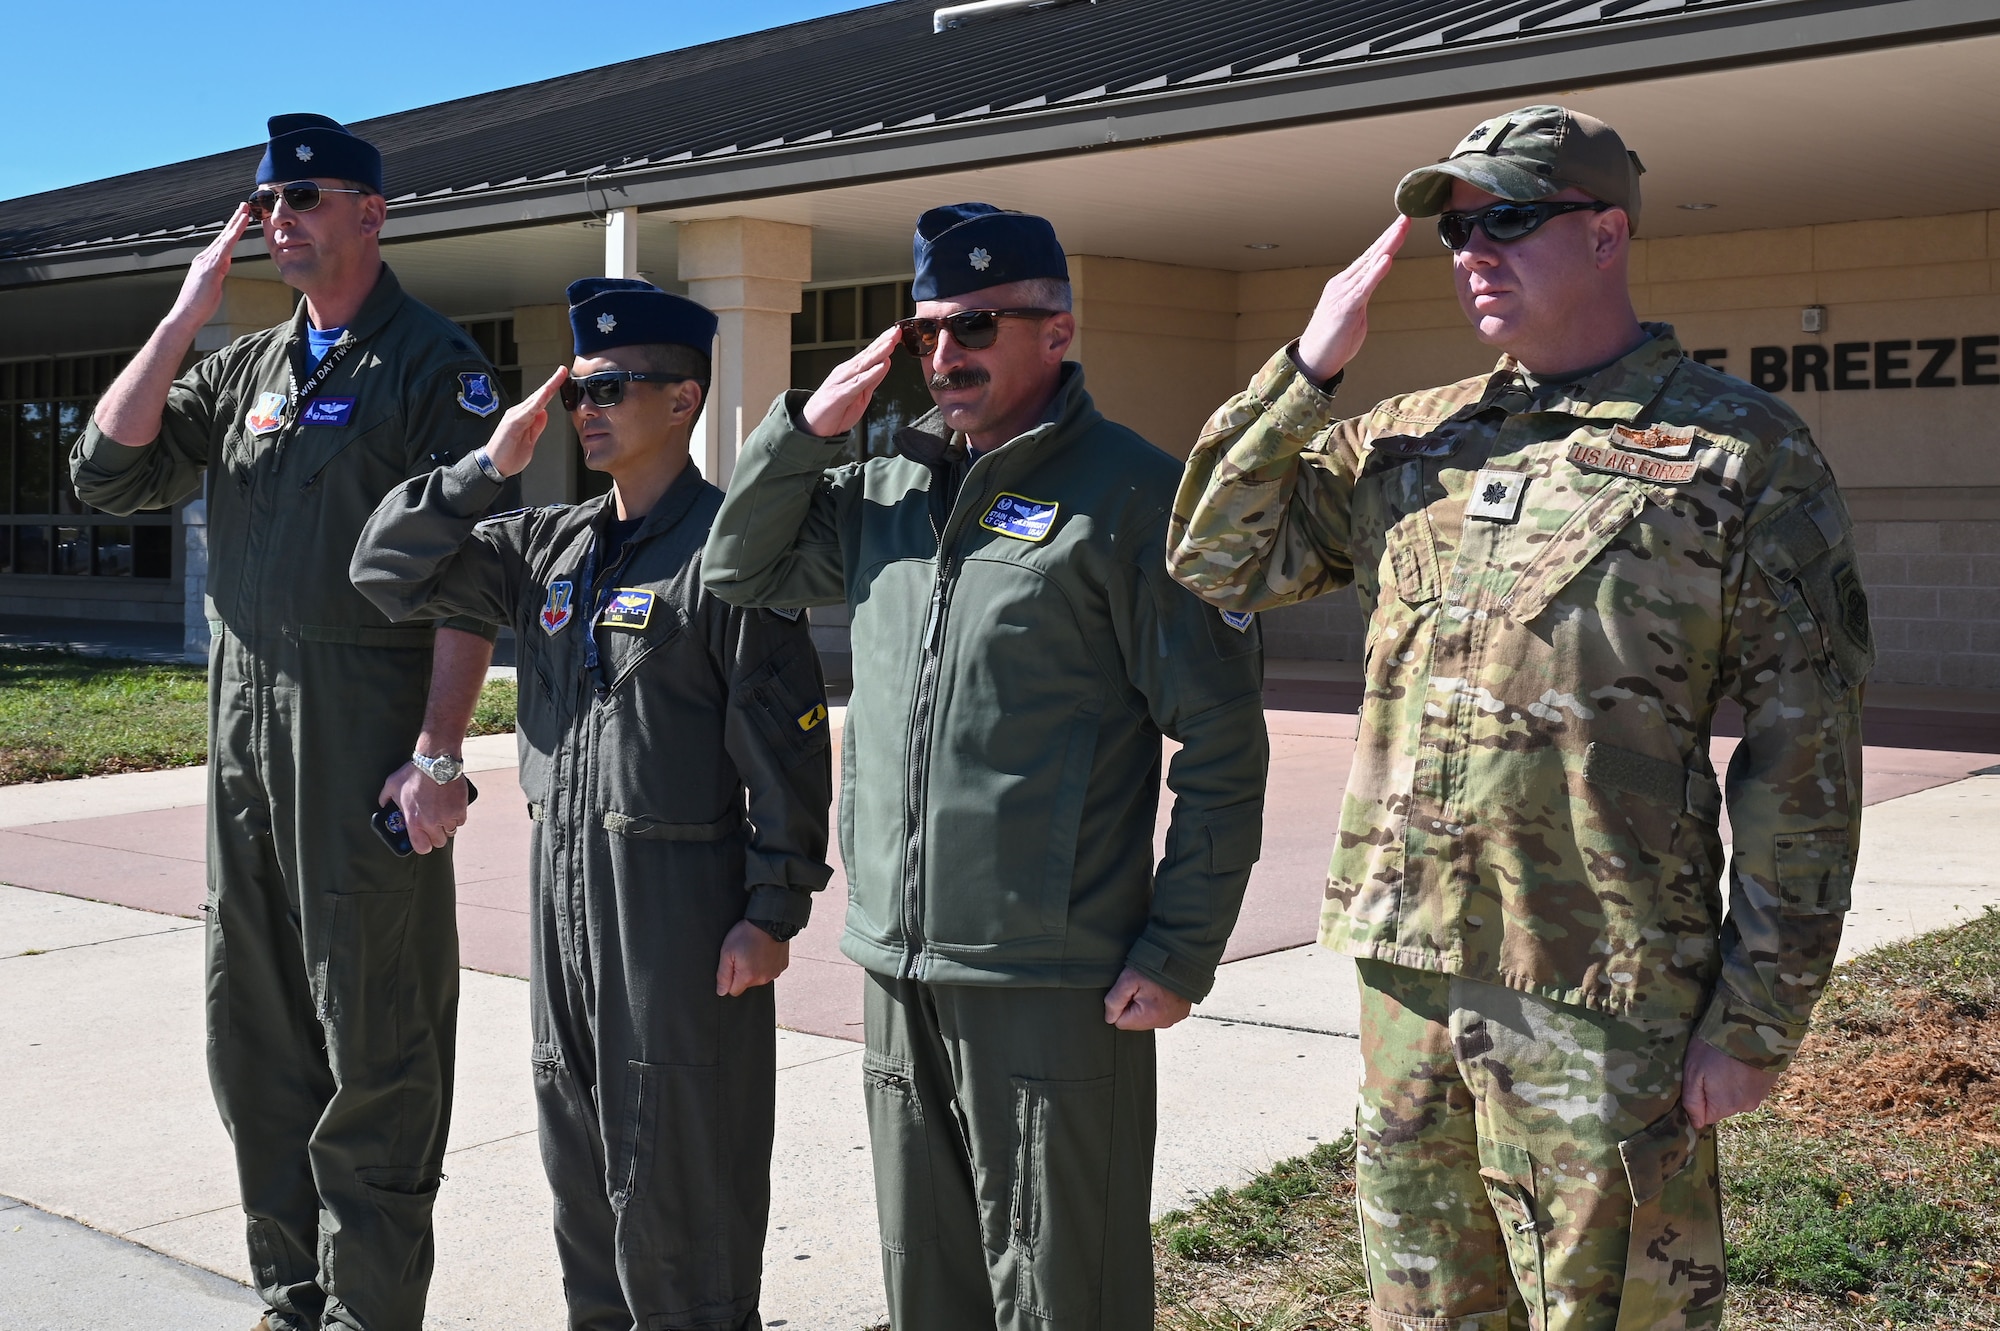 The 350th Spectrum Warfare Wing (SWW) squadron leaders salute U.S. Air Force Lt. Gen. Mary O’Brien, Deputy Chief of Staff for Intelligence, Surveillance, Reconnaissance and Cyber Effects Operations during her visit at Eglin Air Force Base, Fla., Nov. 18, 2022. The 350th SWW will develop and employ evolutionary, cutting-edge capabilities to air component commanders. (U.S. Air Force photo by Staff Sgt. Ericka A. Woolever)